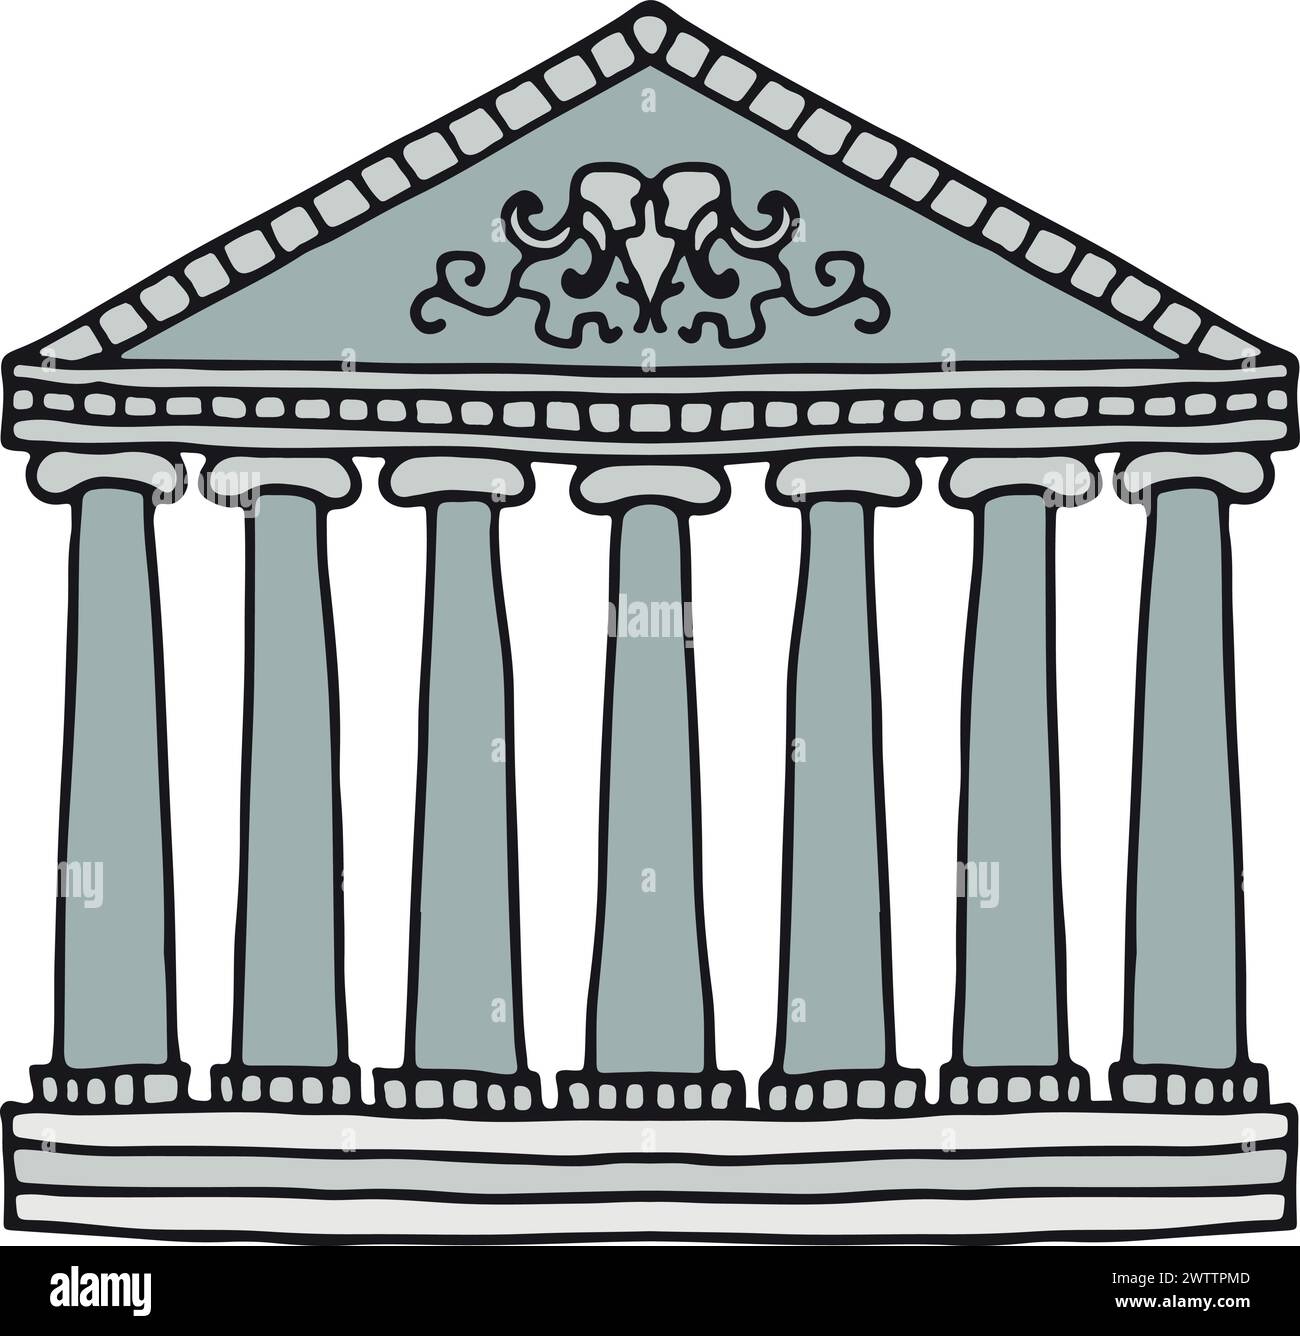 Building facade with classic columns color doodle drawing Stock Vector